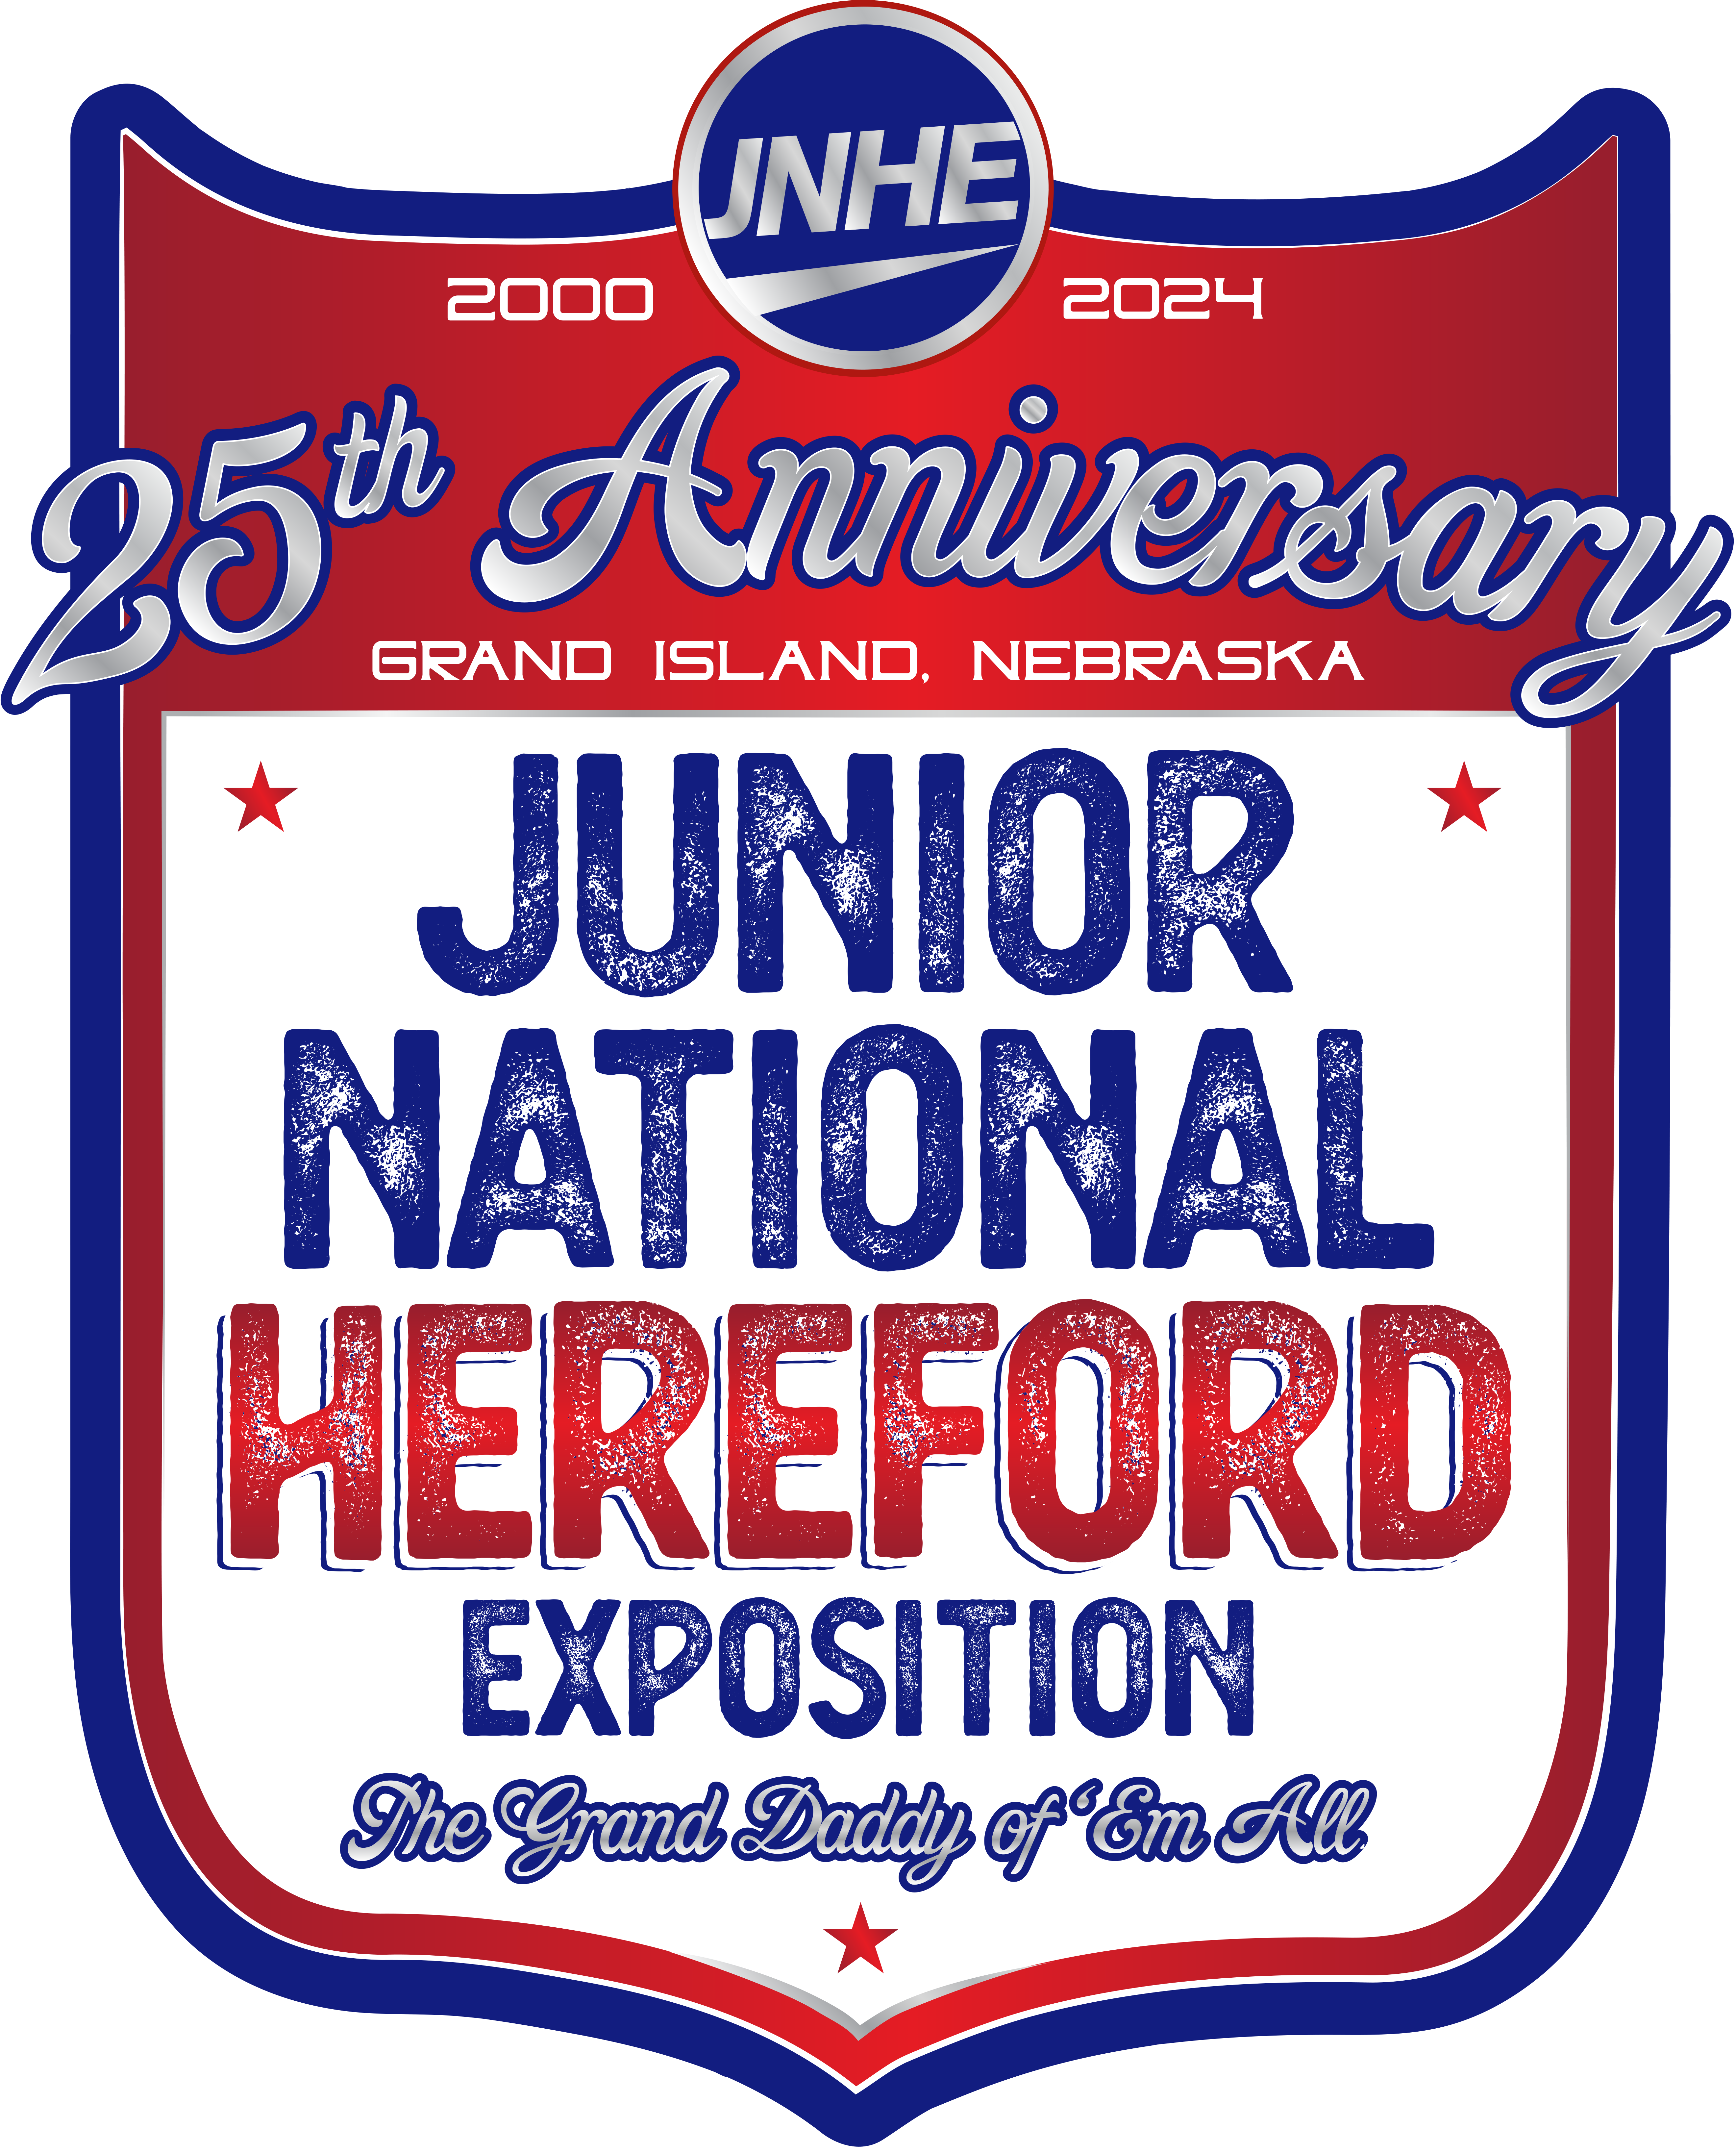 The 25th anniversary junior national herford exposition logo is a stunning representation of the event's rich history and accomplishments. It captures the essence of the junior herford community with its vibrant colors and intricate